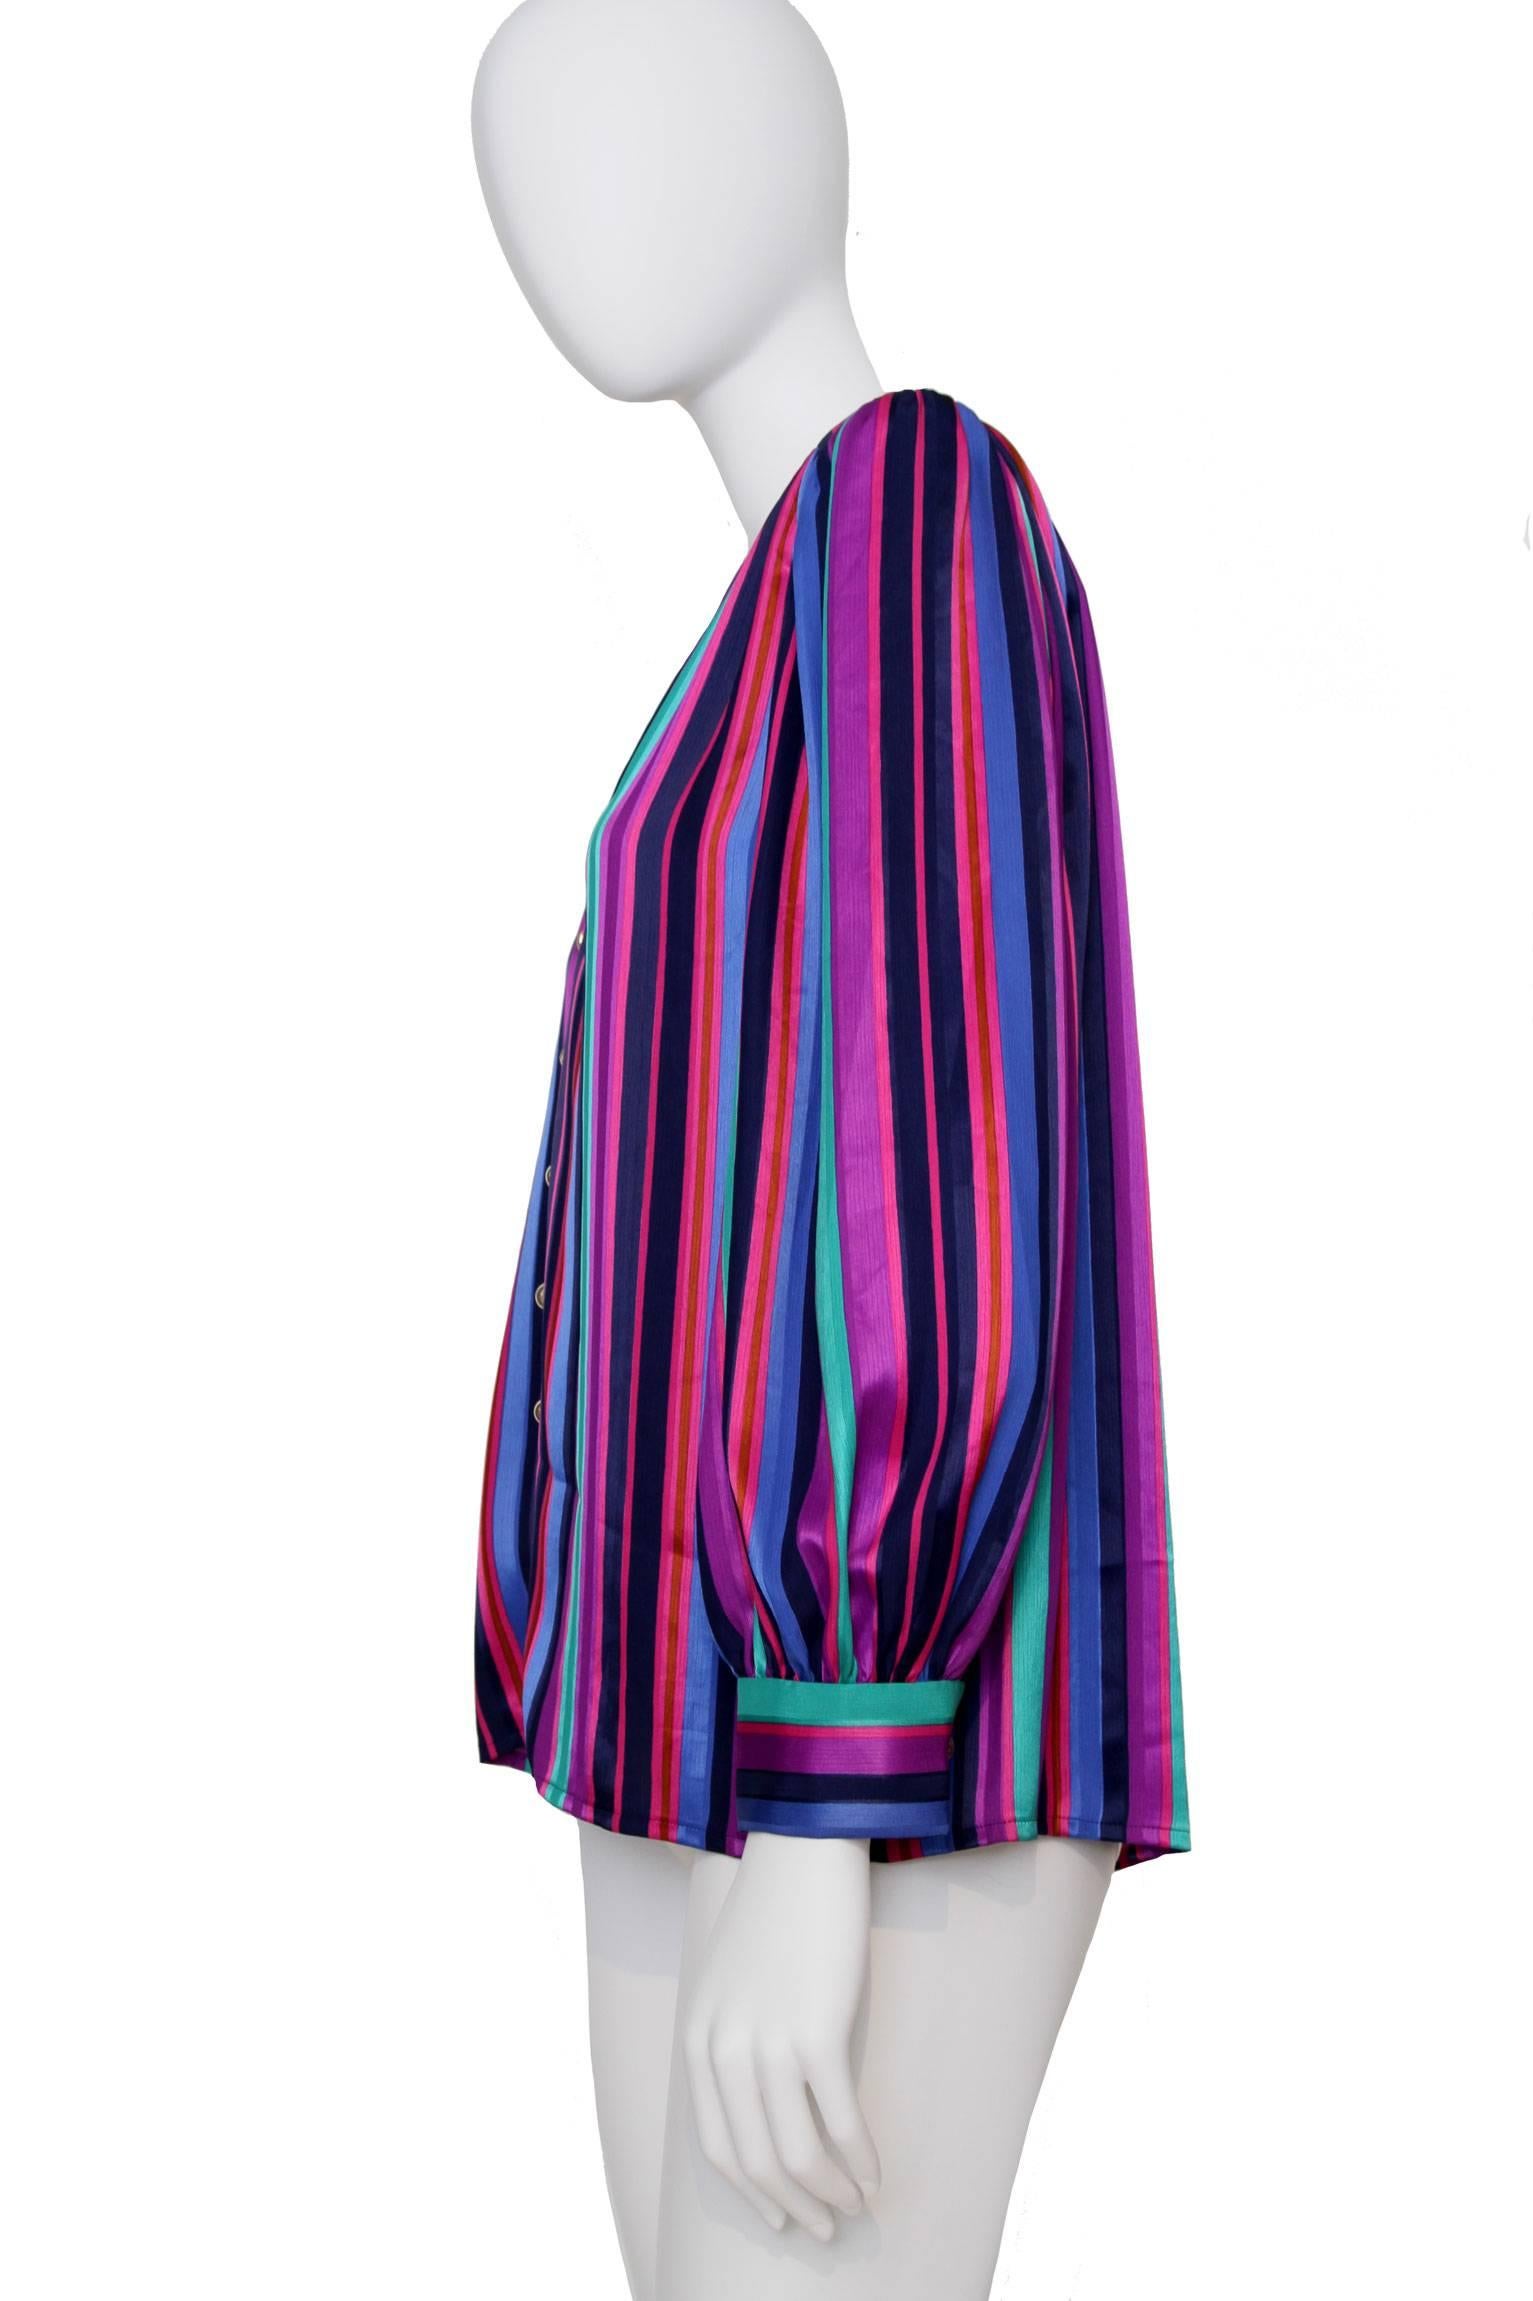 A multicolored 1980s Yves Saint Laurent striped silk shirt with one buttoned cuff and structured shoulders. The vertical stripes are held in various colors and vary in size following a color scheme of black, purple, green, blue and red. The